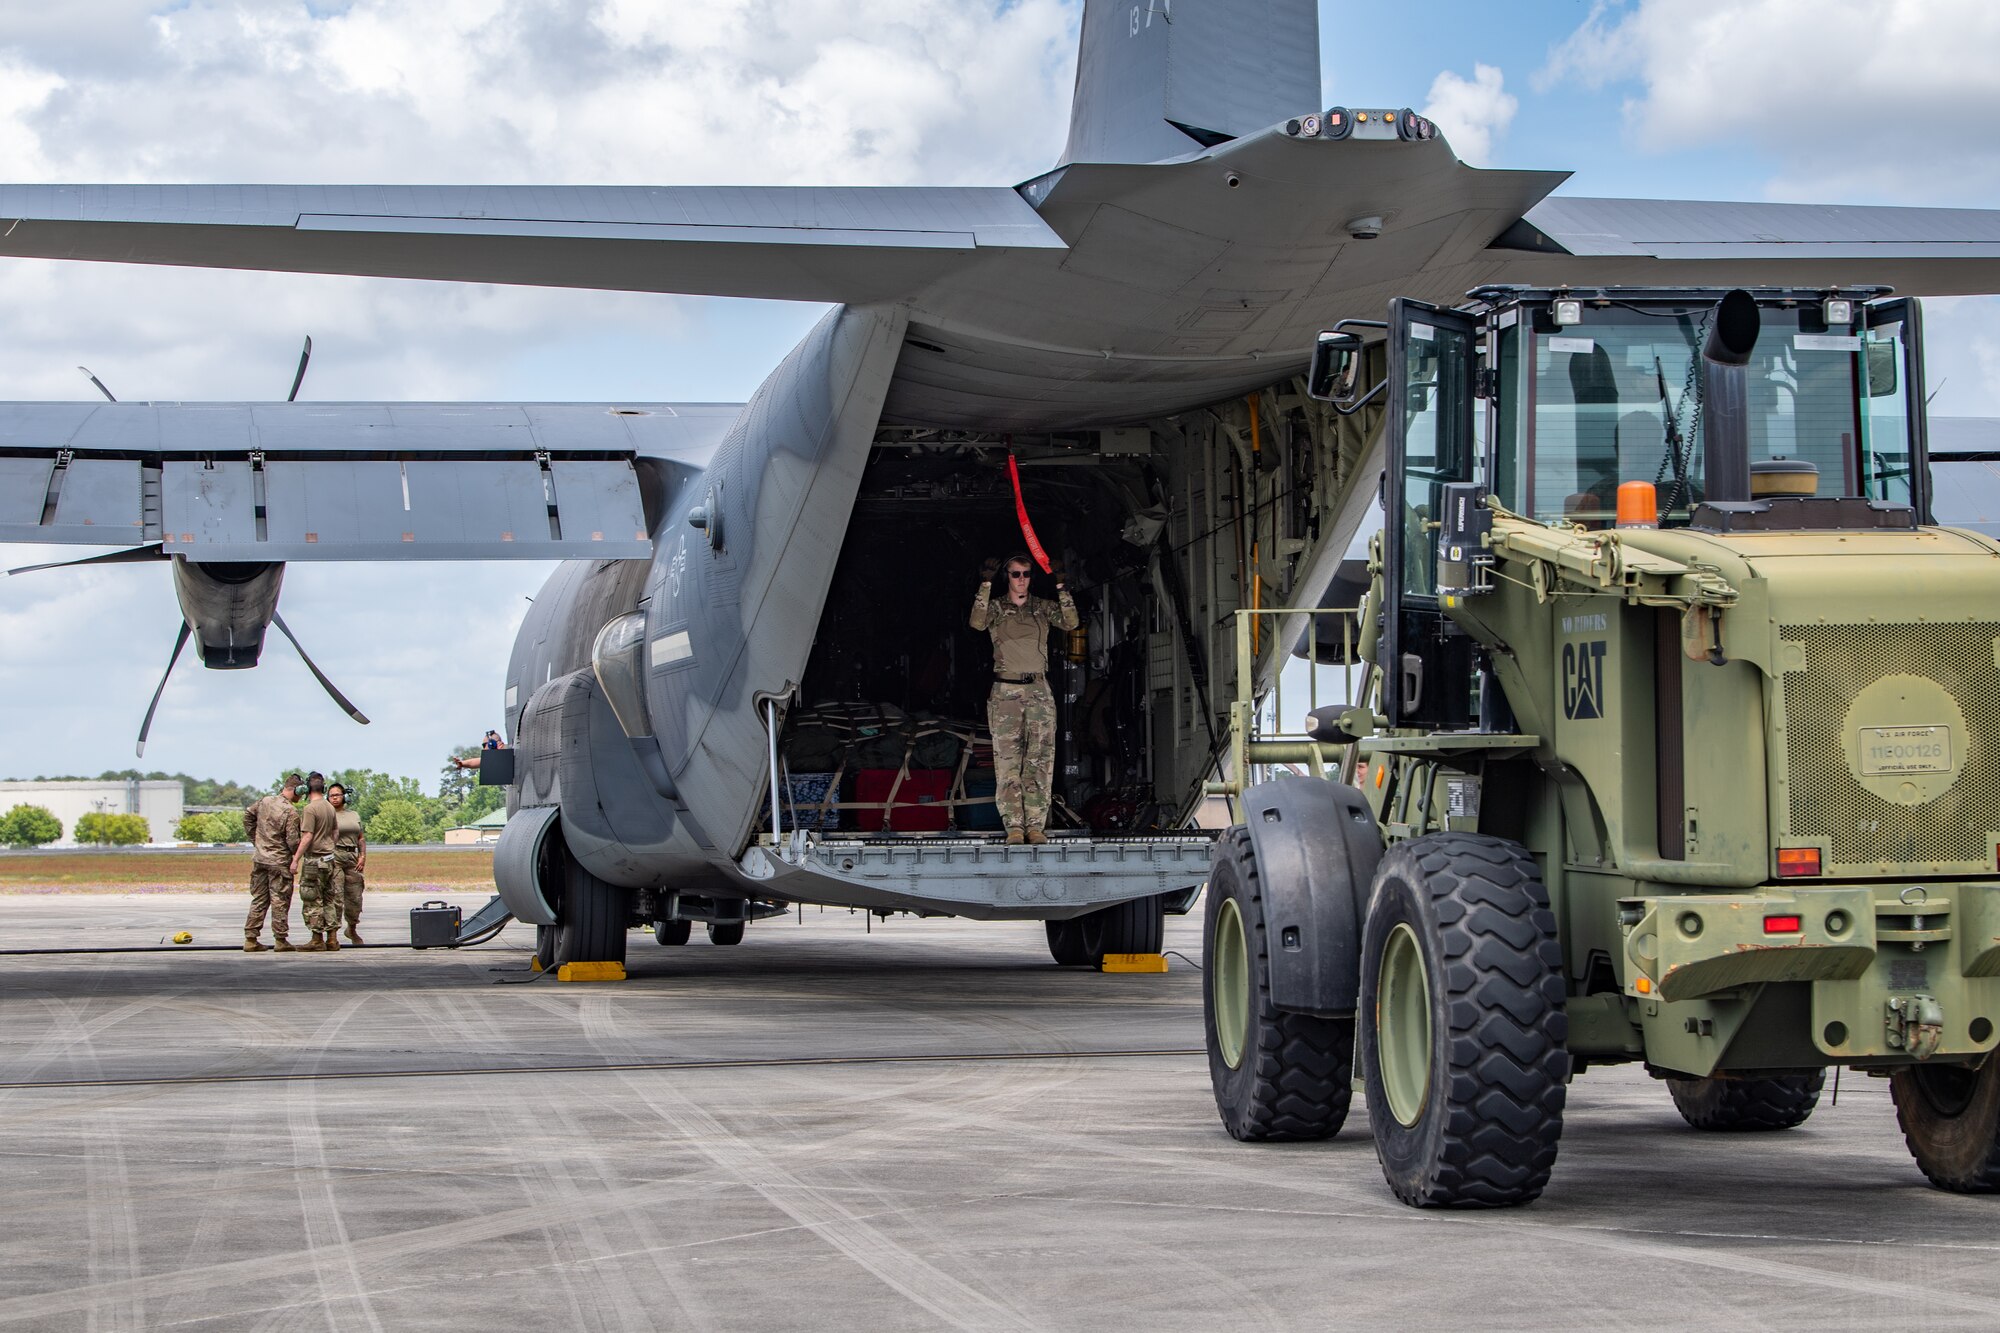 U.S. Air Force Airman 1st Class Blake Daggy, 71st Rescue Squadron loadmaster, directs a forklift to offload cargo during Exercise Ready Tiger 24-1 at Savannah Air National Guard Base, Georgia, April 10, 2024. The 71st RQS provided essential airlift support for transporting cargo and personnel and responded to combat search and rescue scenarios throughout the exercise. During Ready Tiger 24-1, the 23rd Wing will be evaluated on the integration of Air Force Force Generation principles such as Agile Combat Employment, integrated combat turns, forward aerial refueling points, multi-capable Airmen, and combat search and rescue capabilities. (U.S. Air Force photo by Senior Airman Courtney Sebastianelli)